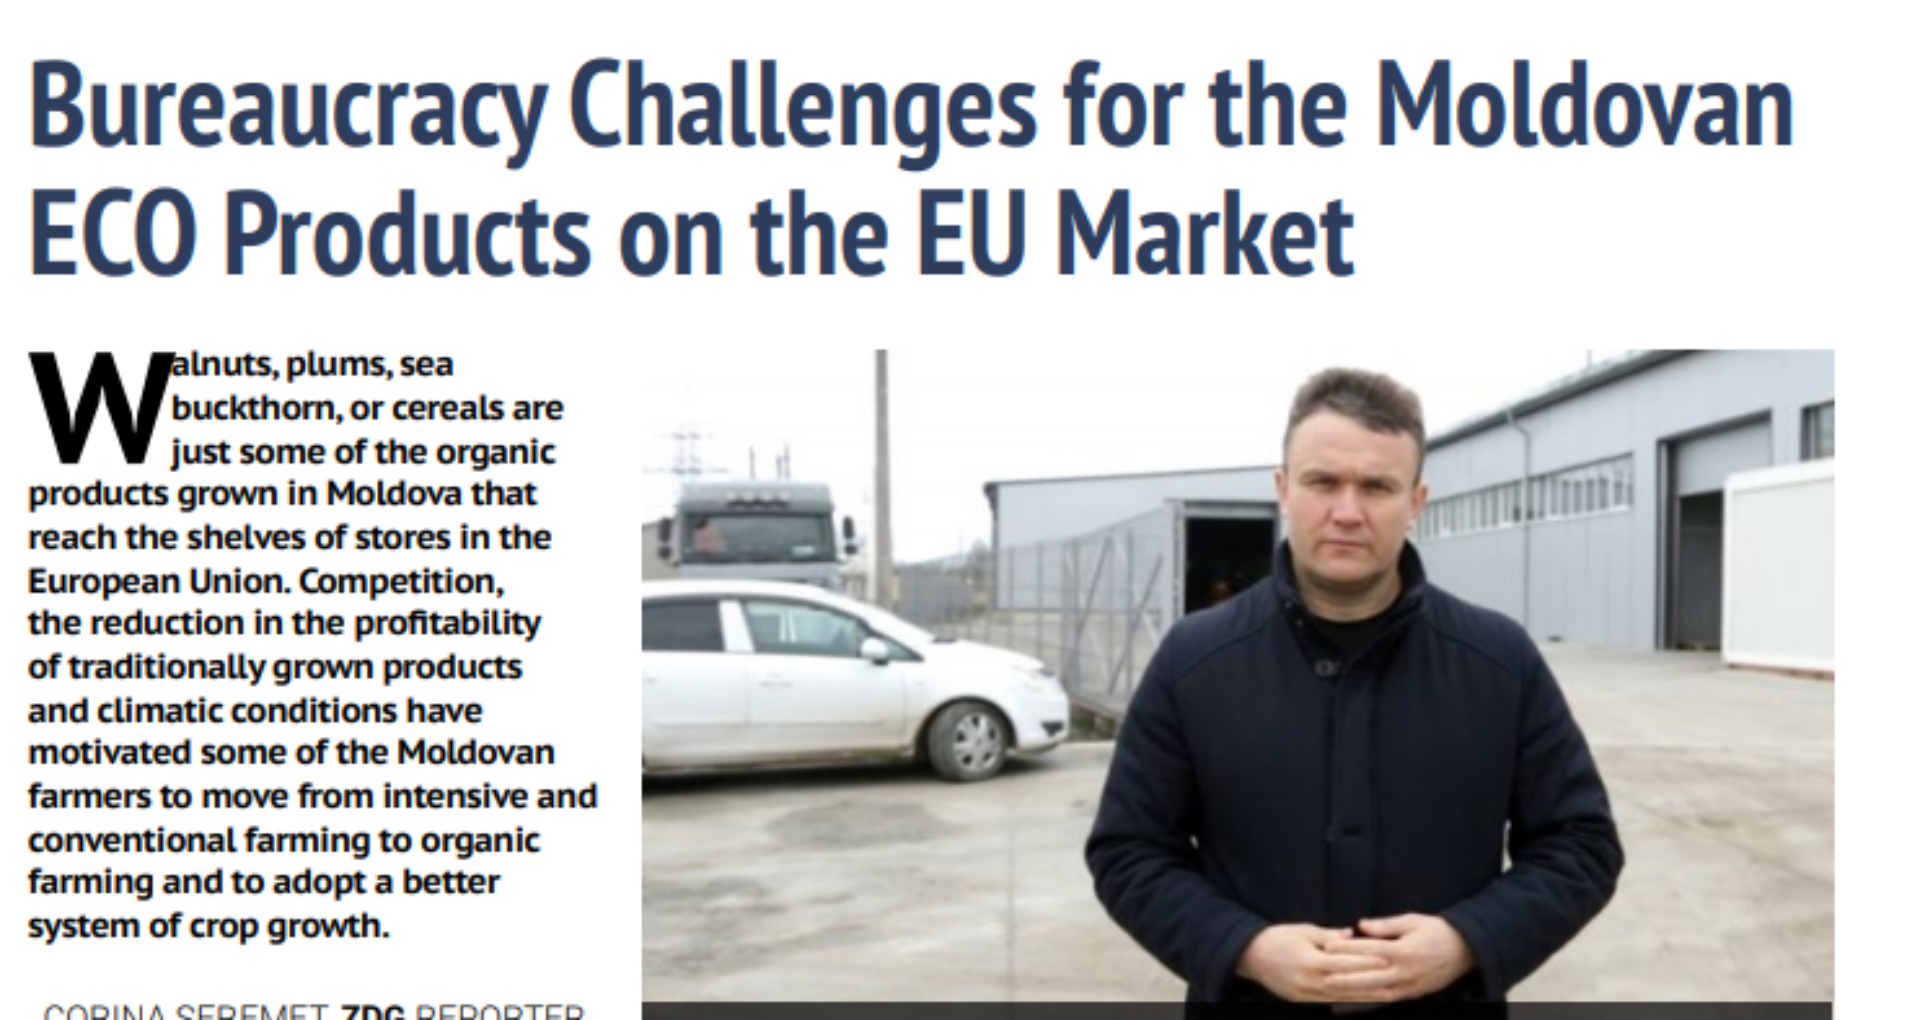 Bureaucracy Challenges for the Moldovan ECO Products on the EU Market